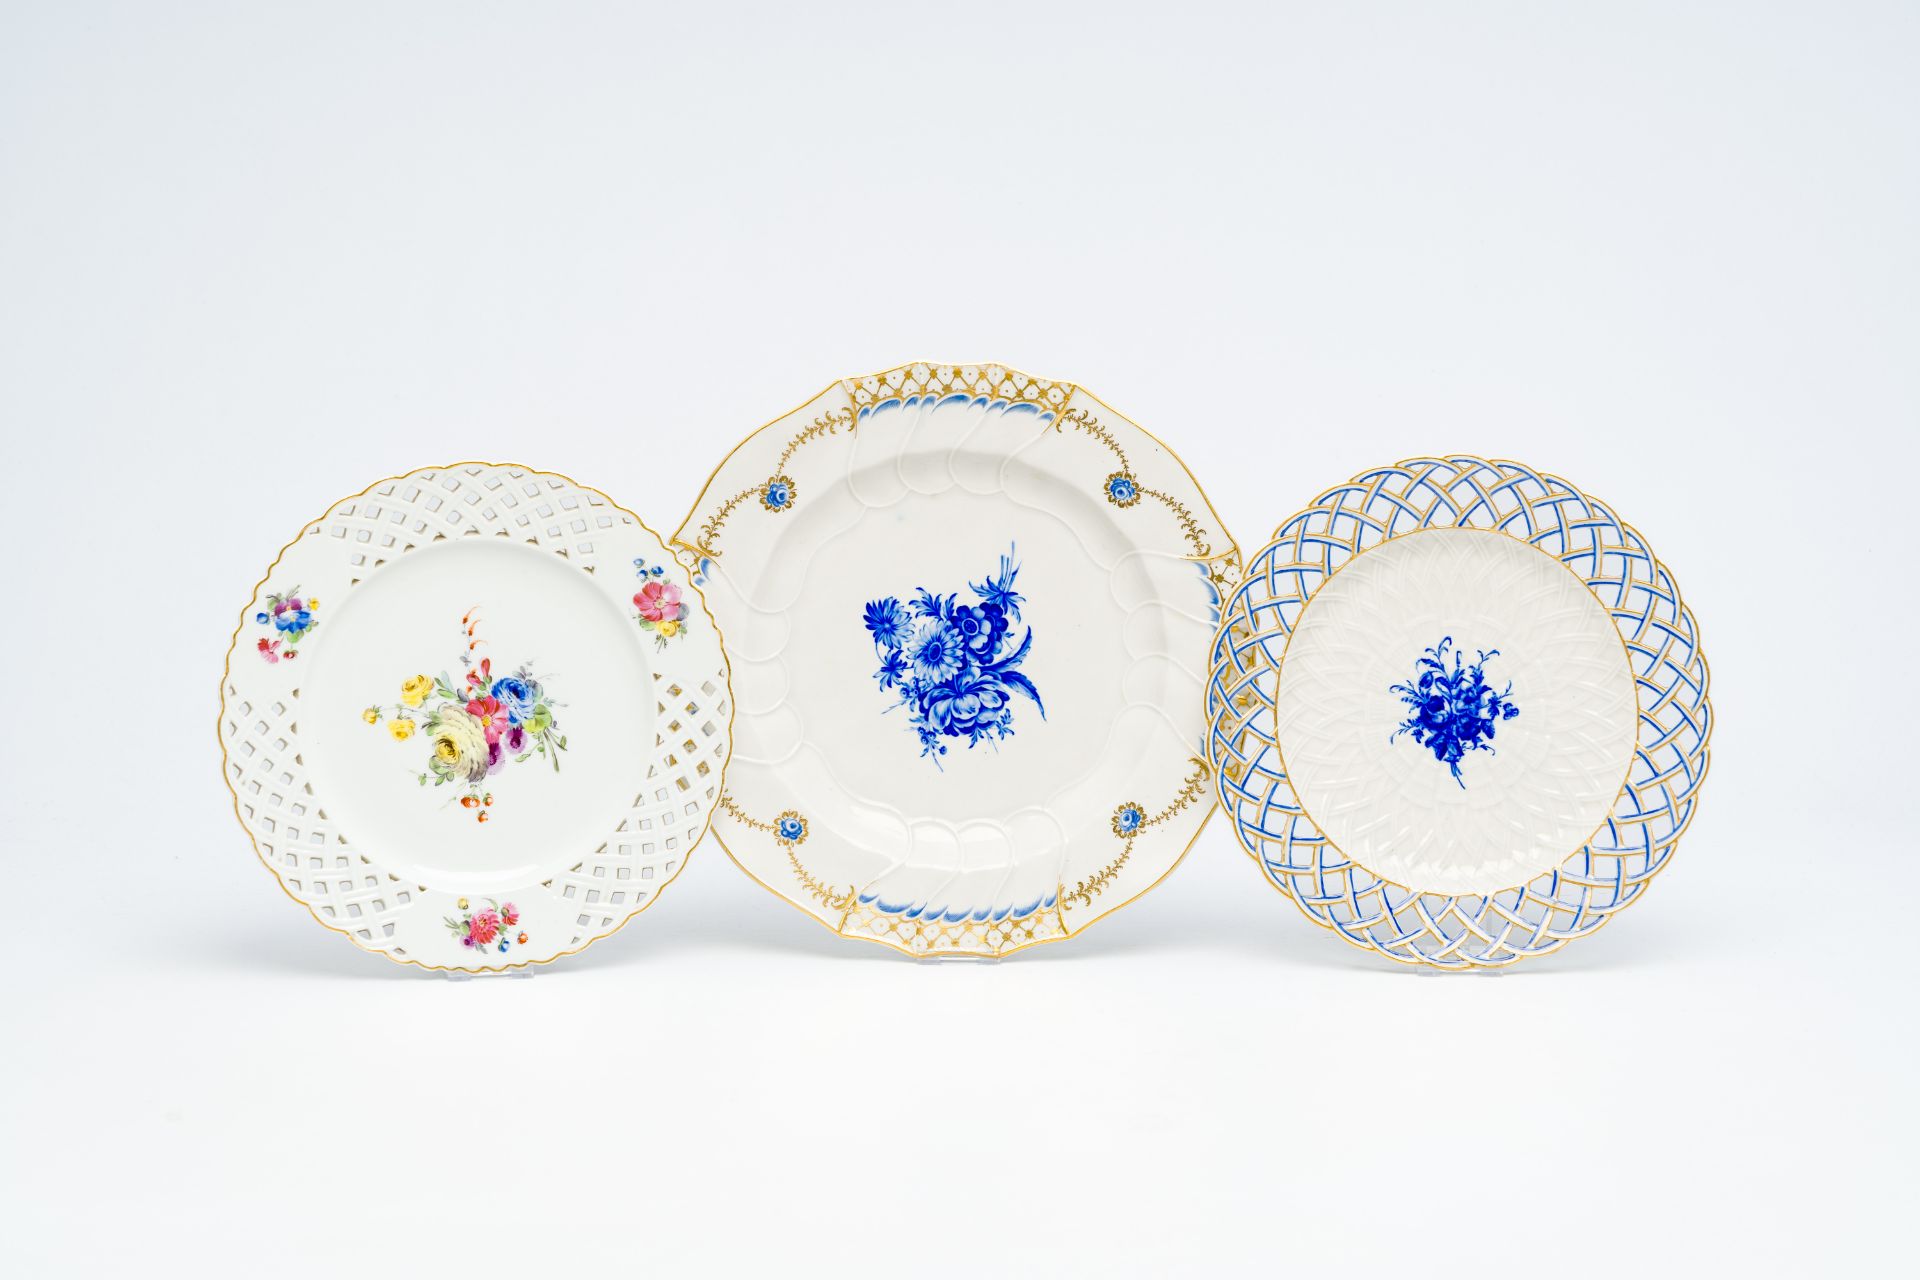 Three polychrome porcelain plates with floral design, Tournai and The Hague, 18th C.